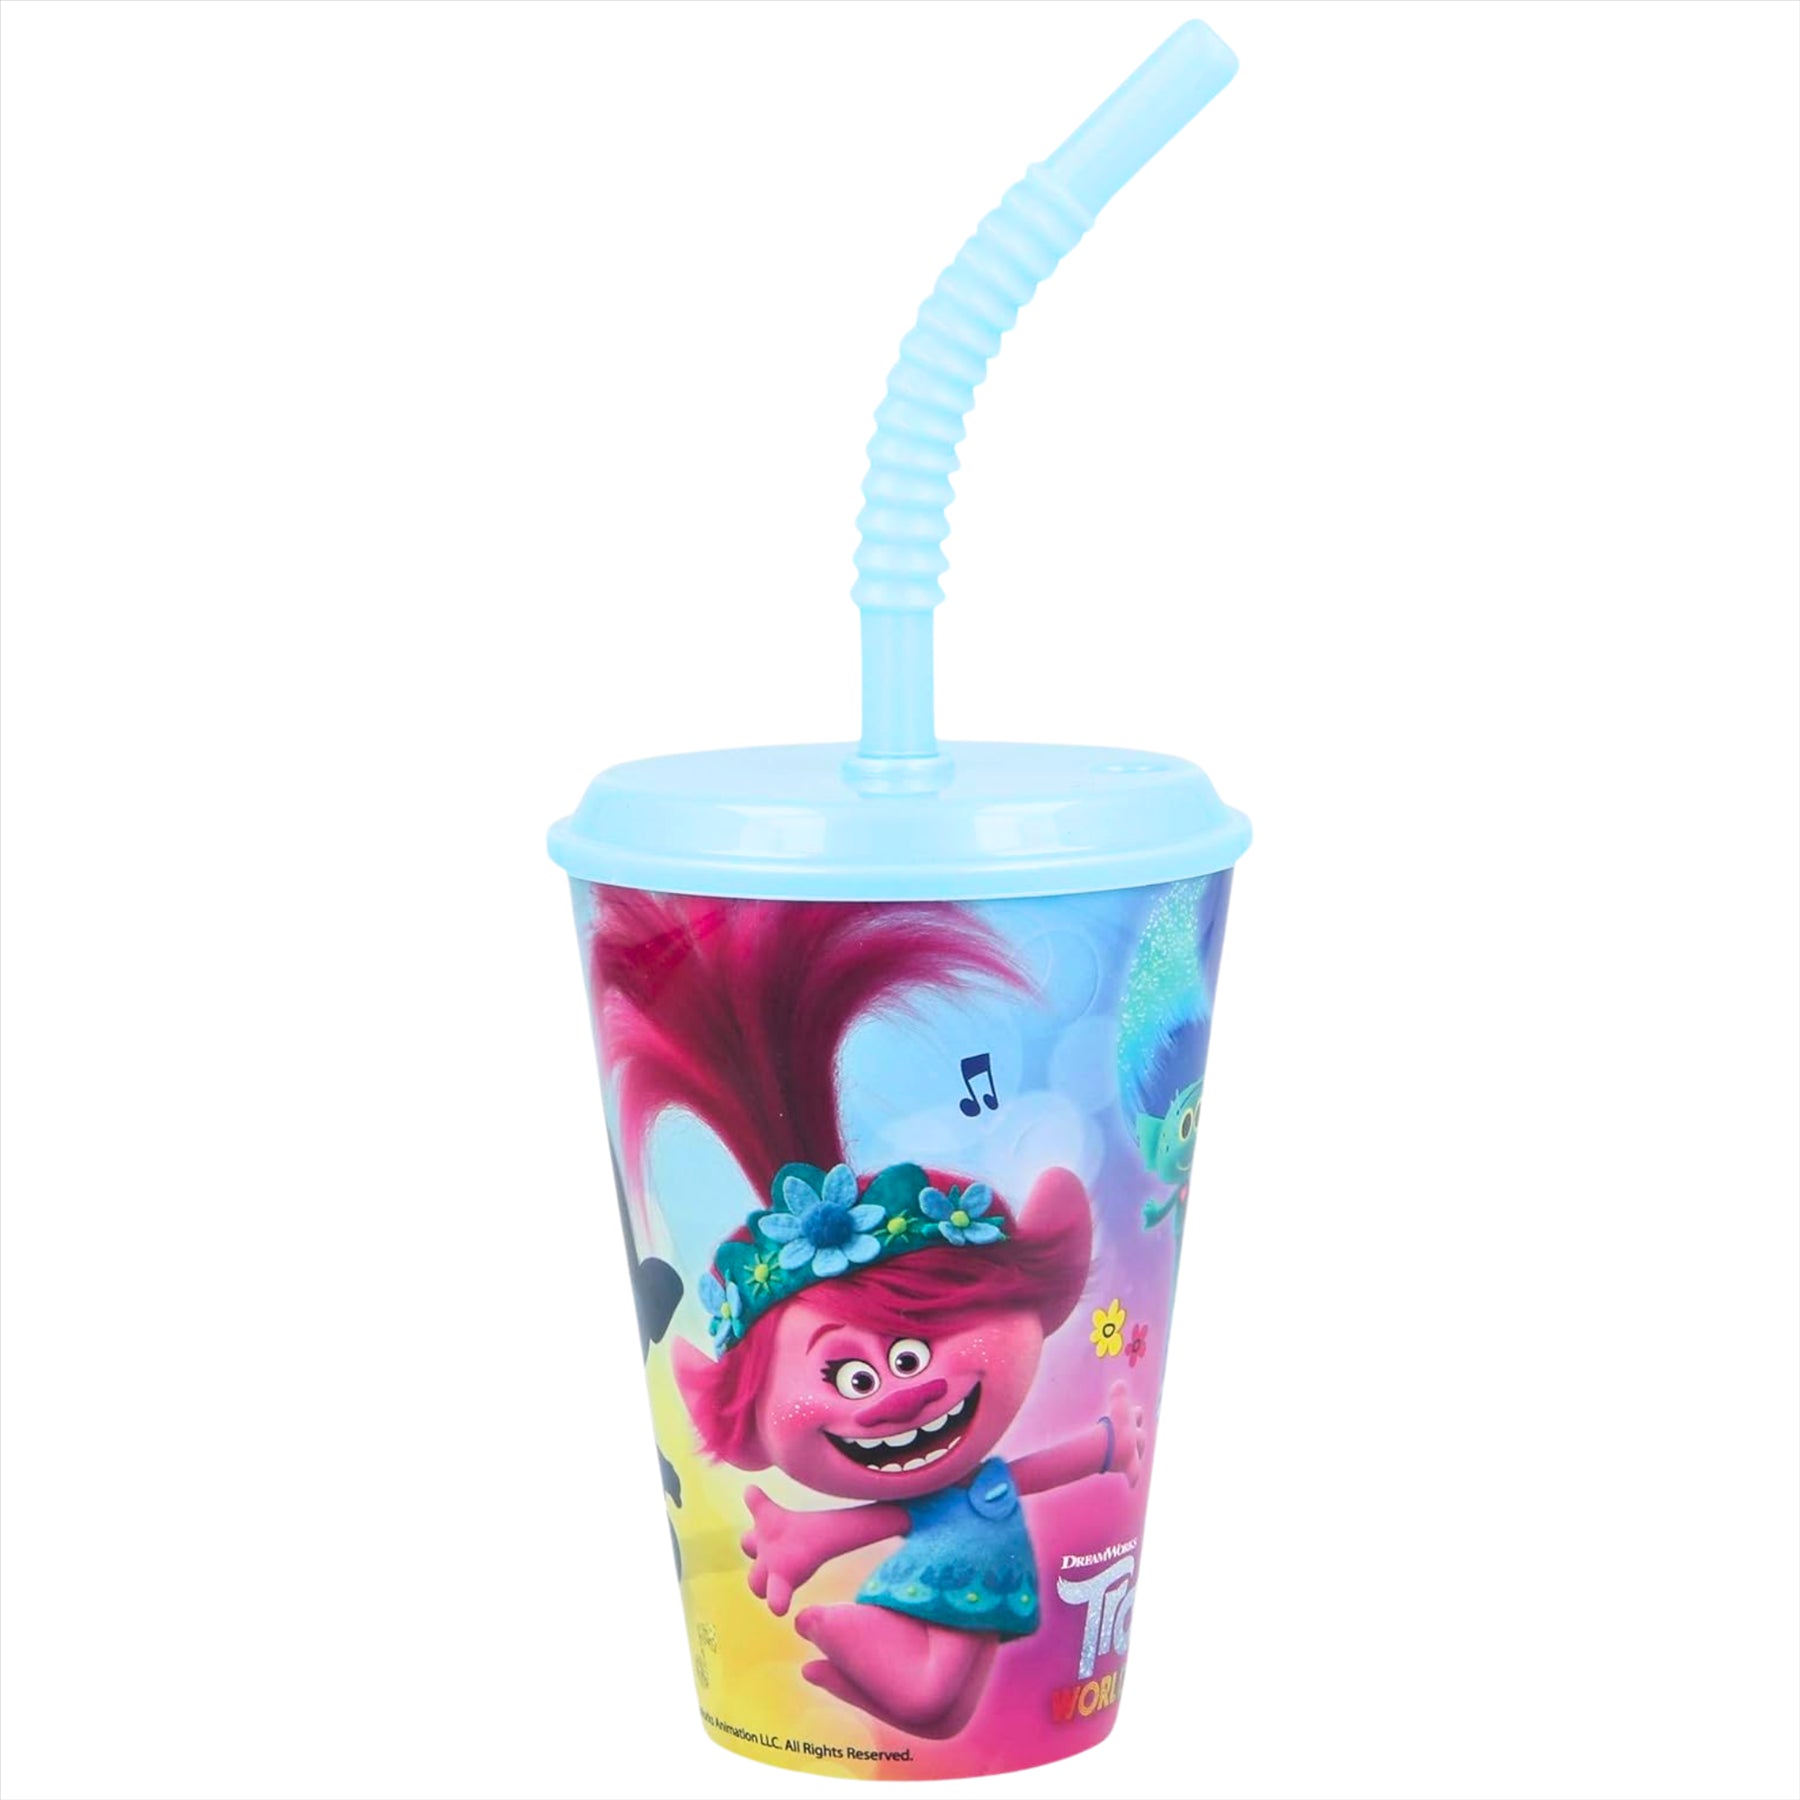 Trolls World Tour Plastic Cup with Straw - 430ml Drinking Cup Tumbler with Lid